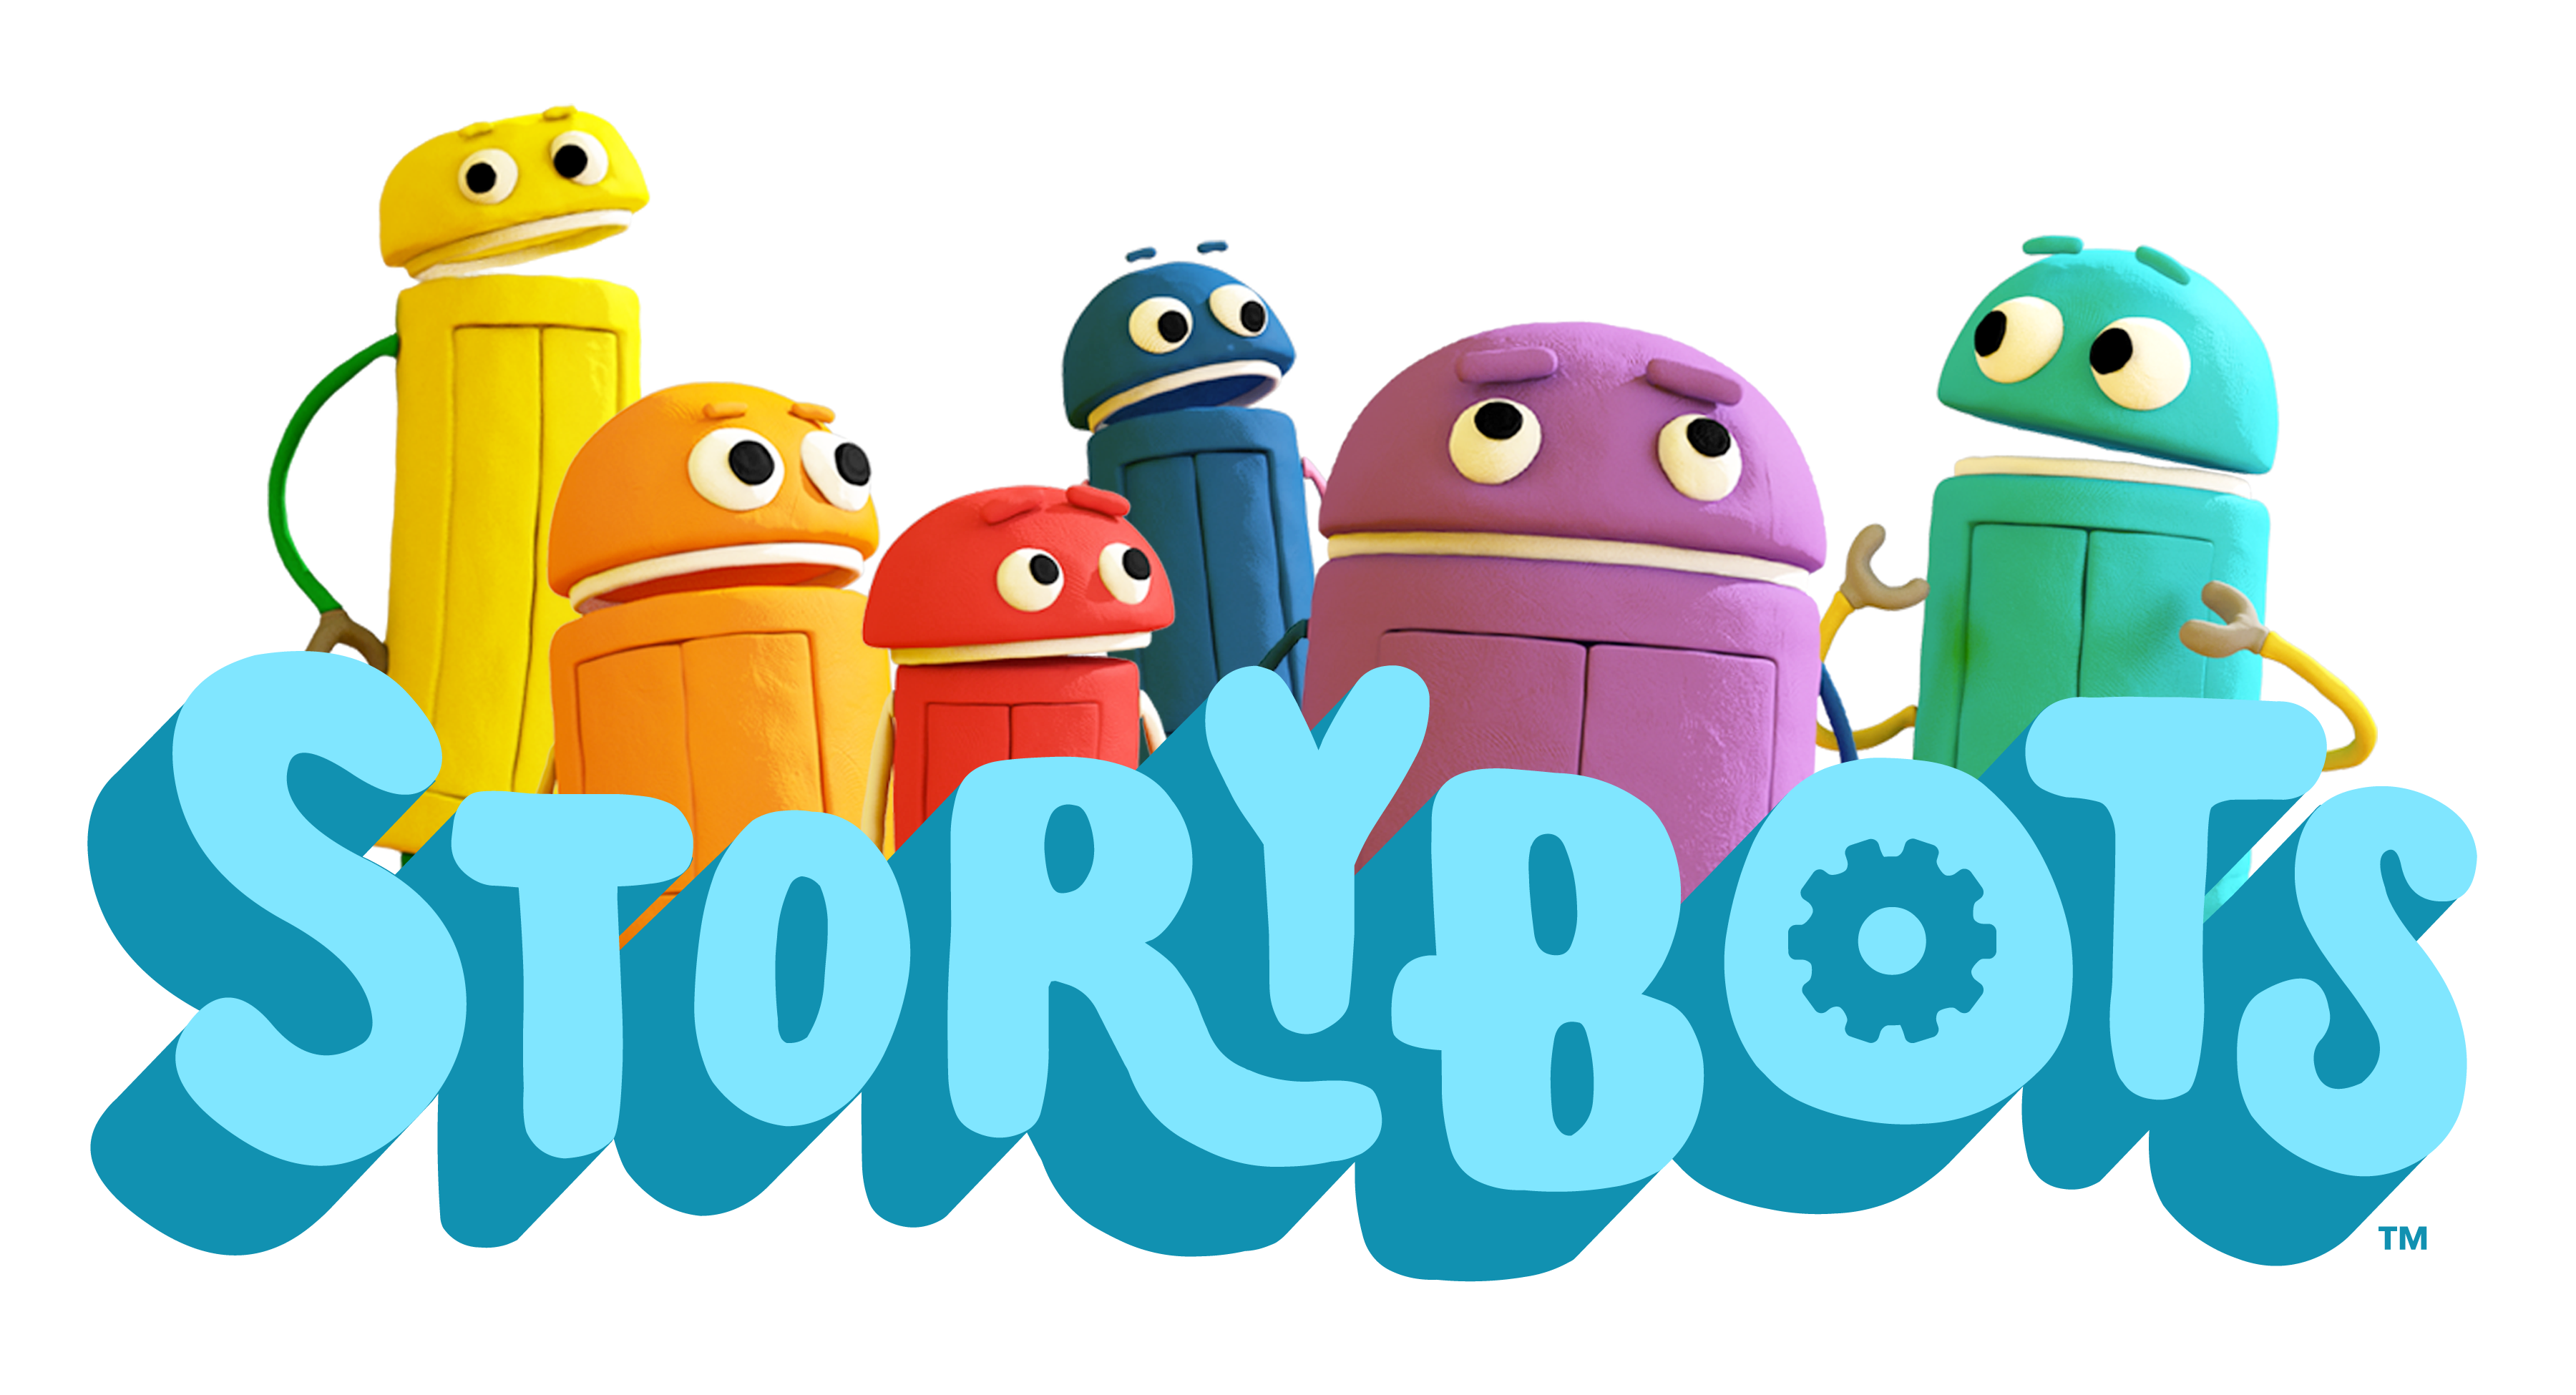 StoryBots® Turns One Year Old; Collection of Apps for Kids & Family, from Creators of JibJab, Celebrates Year of Growth 18 Million Learning Videos Viewed